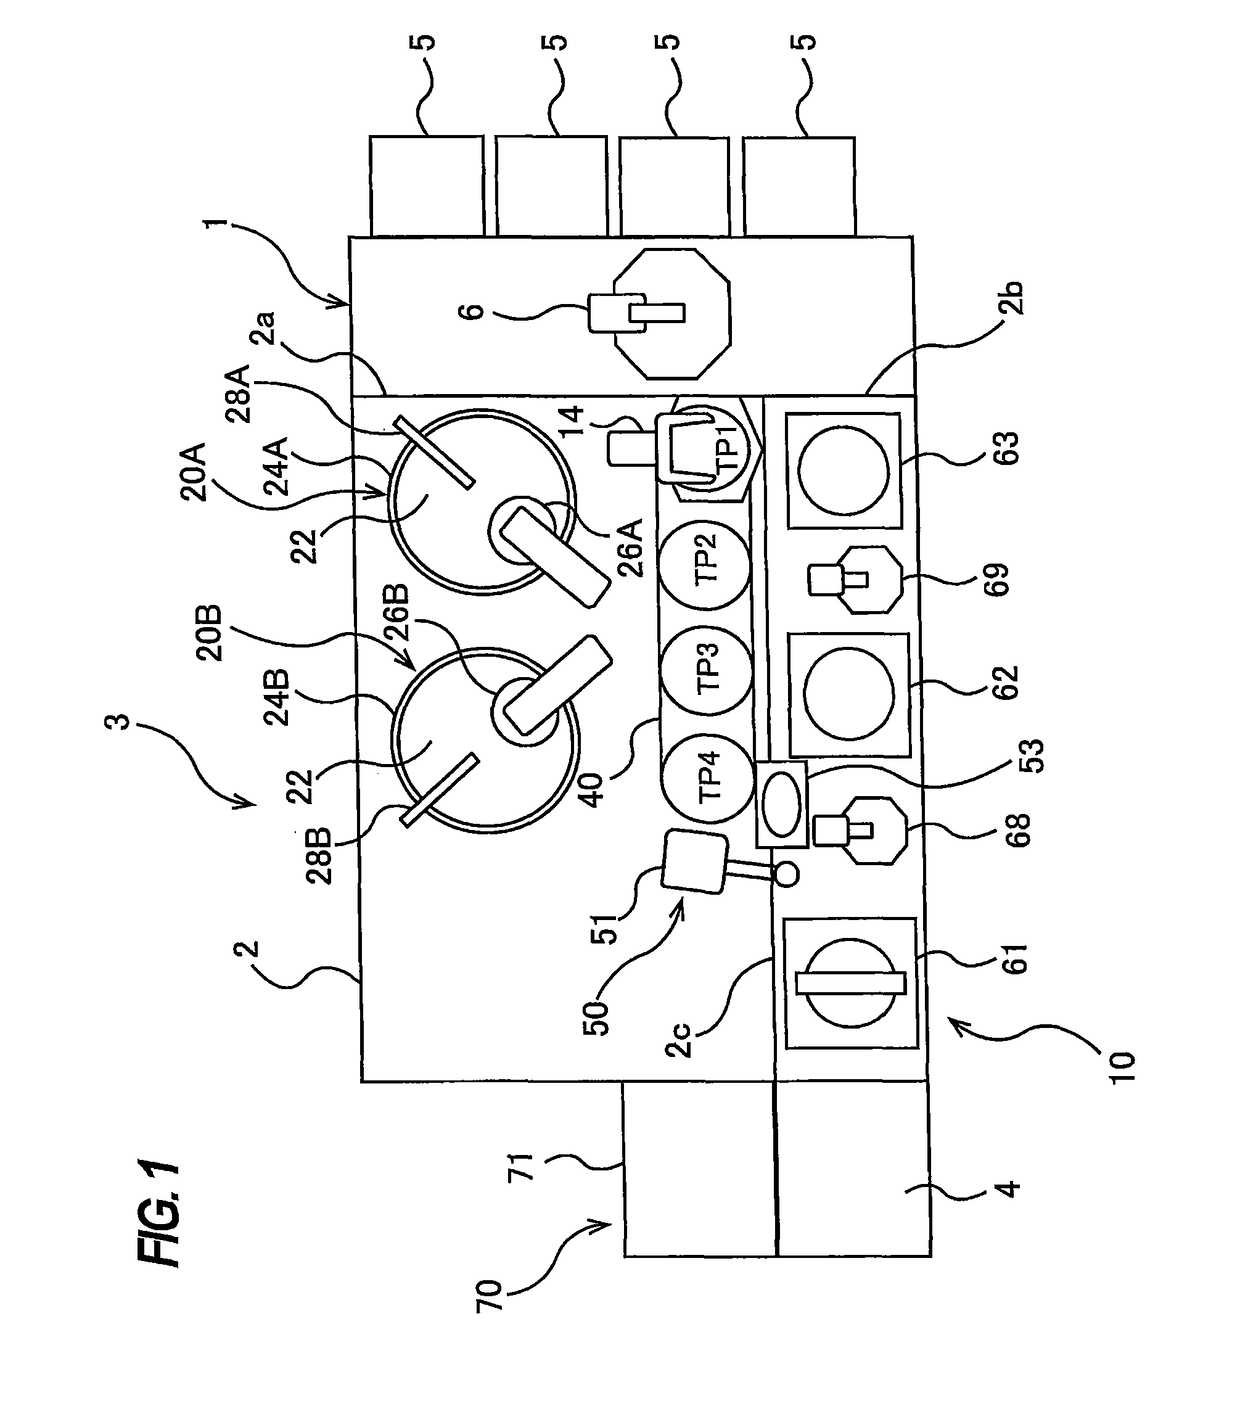 Adjustment apparatus for adjusting processing units provided in a substrate processing apparatus, and a substrate processing apparatus having such an adjustment apparatus